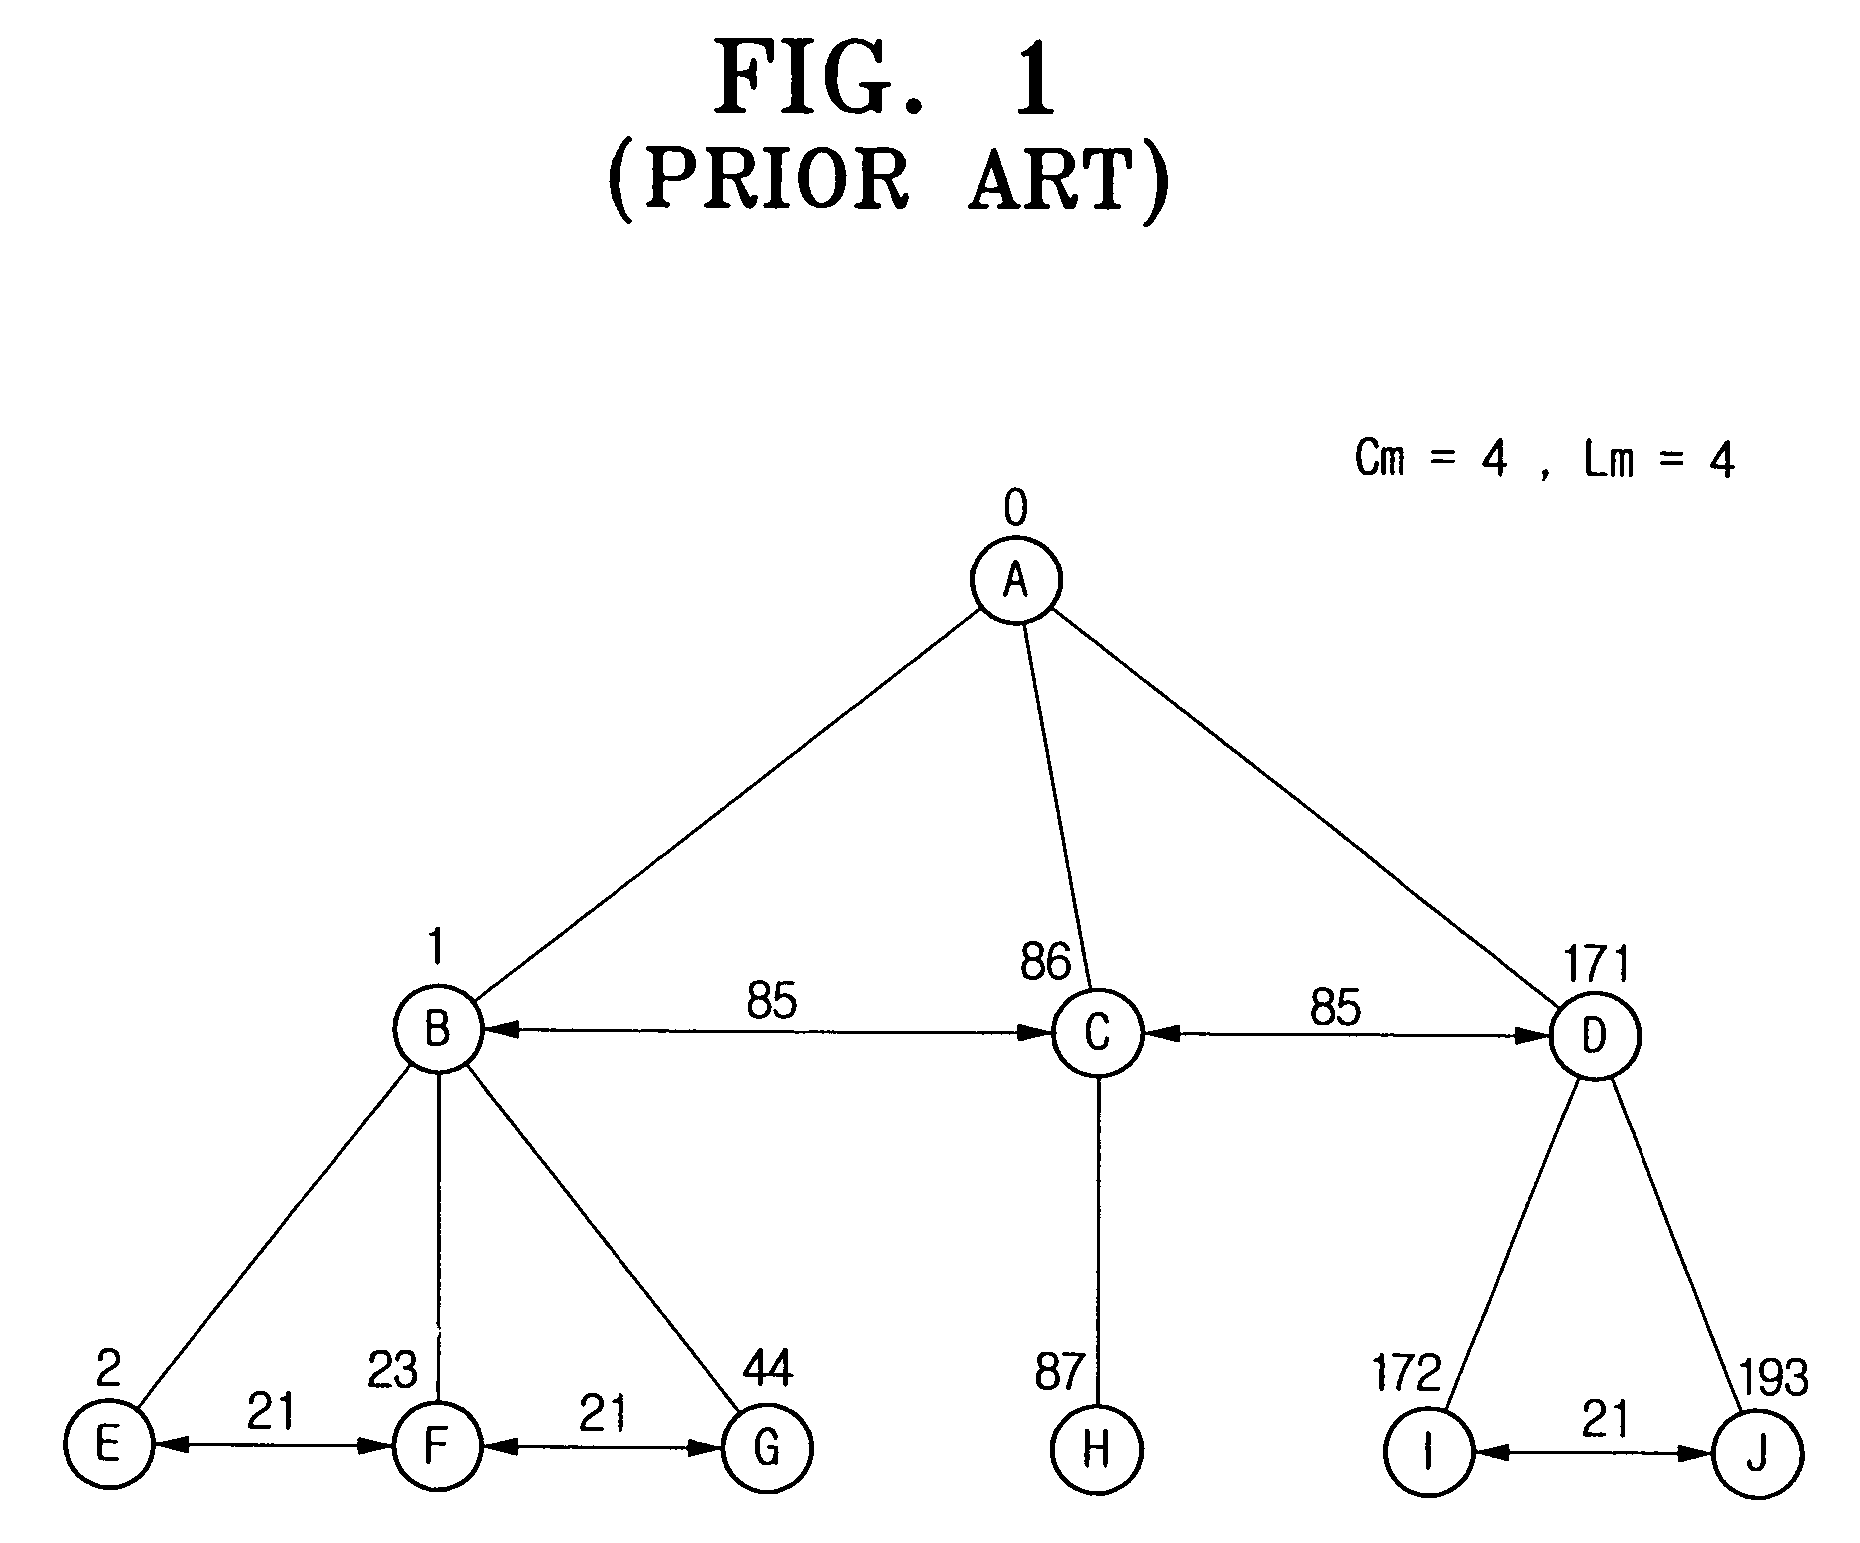 Zigbee network device for assigning addresses to child nodes after constructing cluster-tree structure, address assigning method and routing method